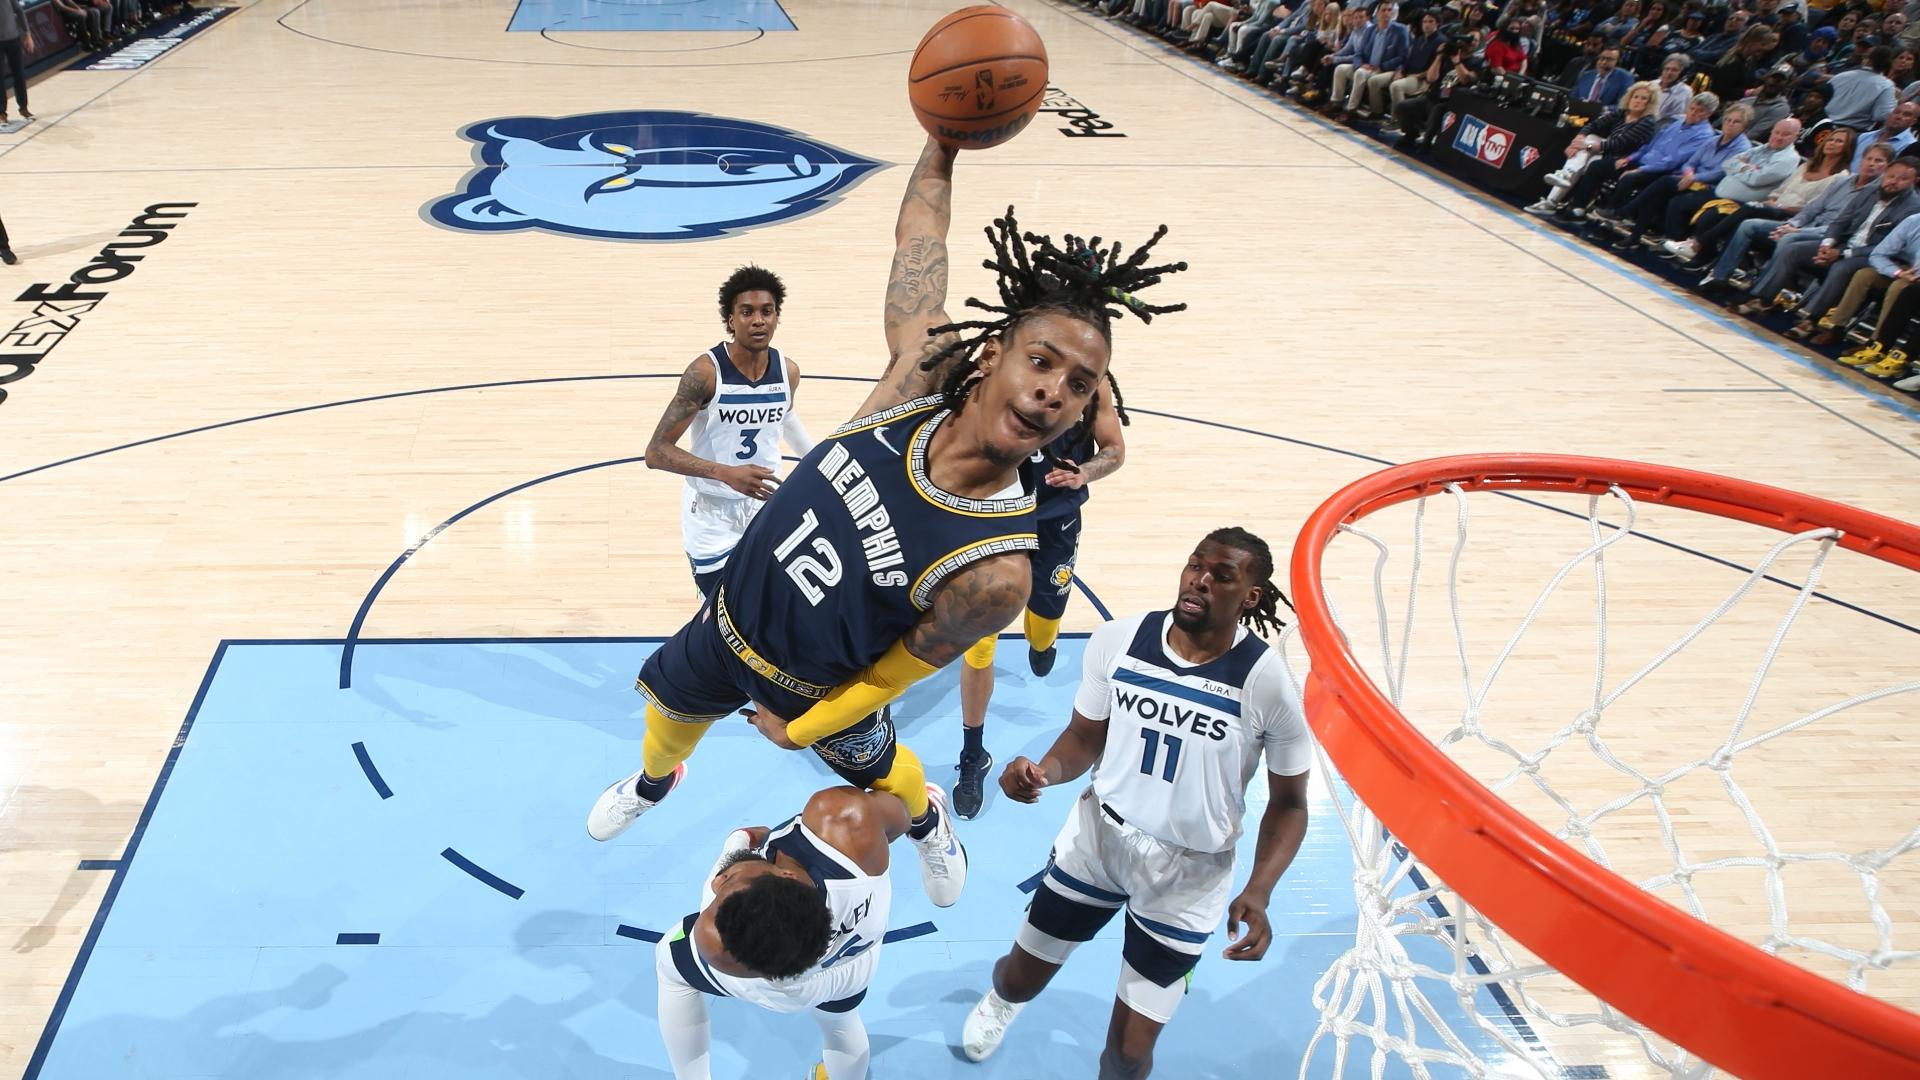 Grizzlies Star Ja Morant Throws Down 'jaw Breaker' Poster Dunk Of The Playoffs Vs. Timberwolves